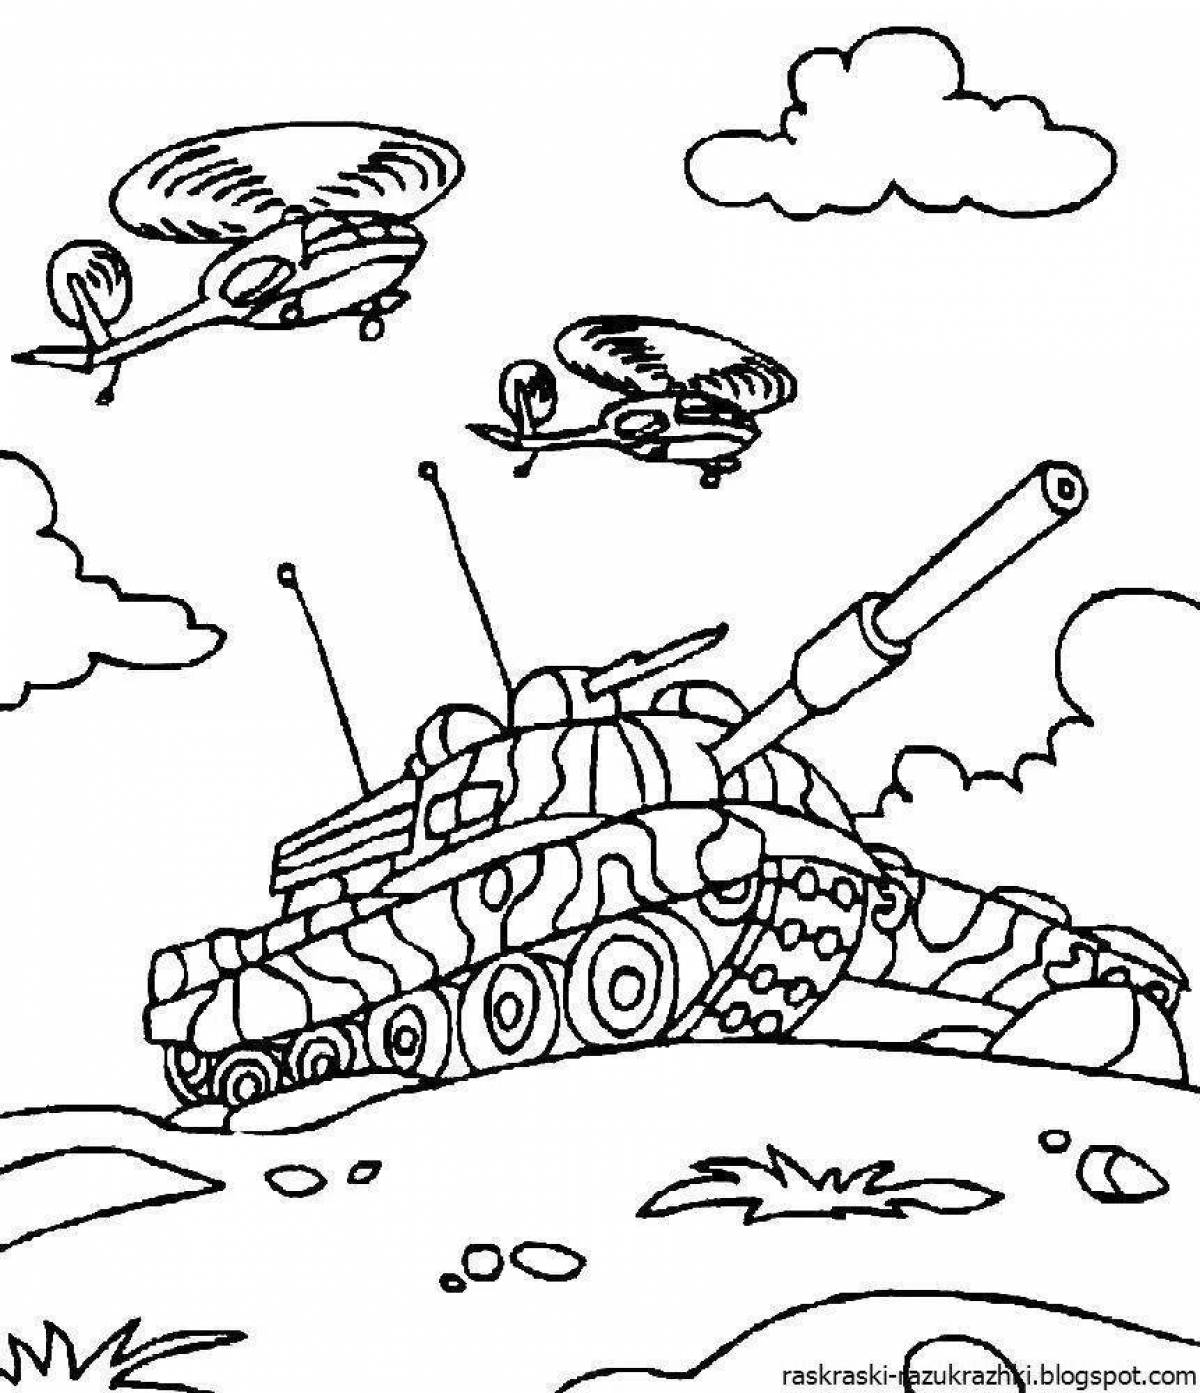 Coloring pages incredible tanks and planes for kids